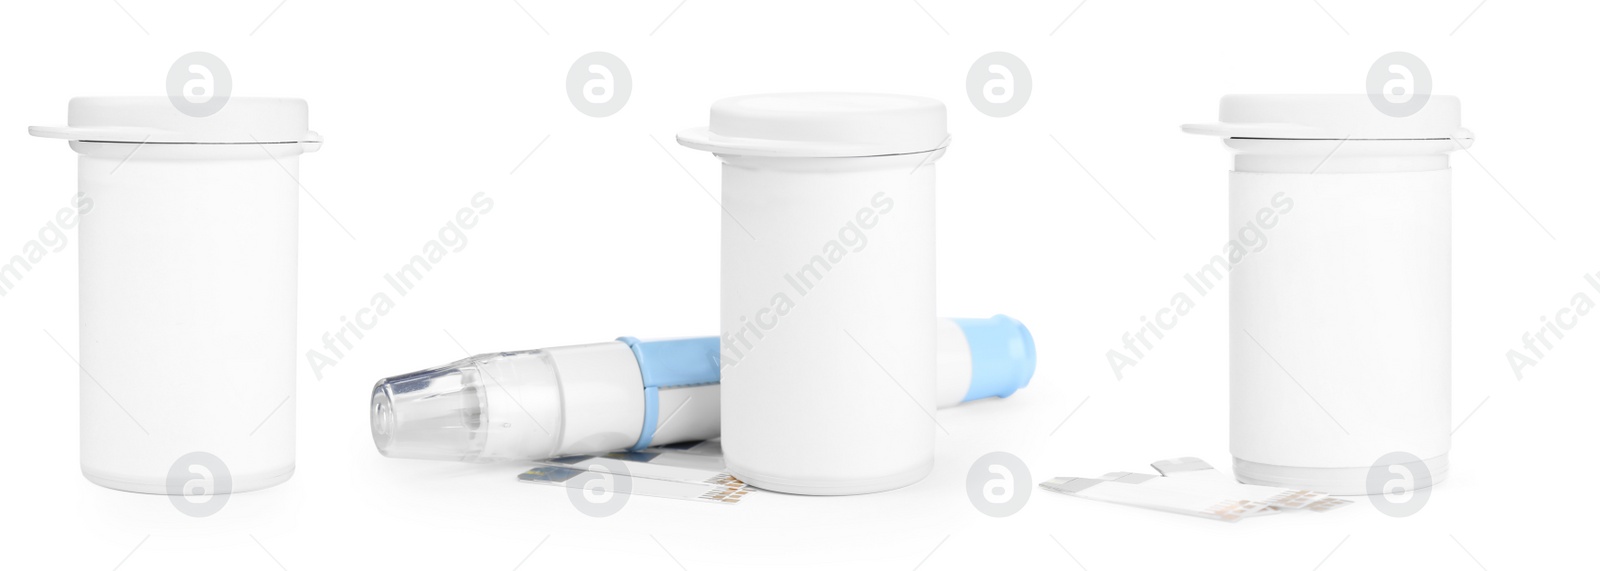 Image of Set with lancet pen, jars and test strips on white background, banner design. Diabetes control